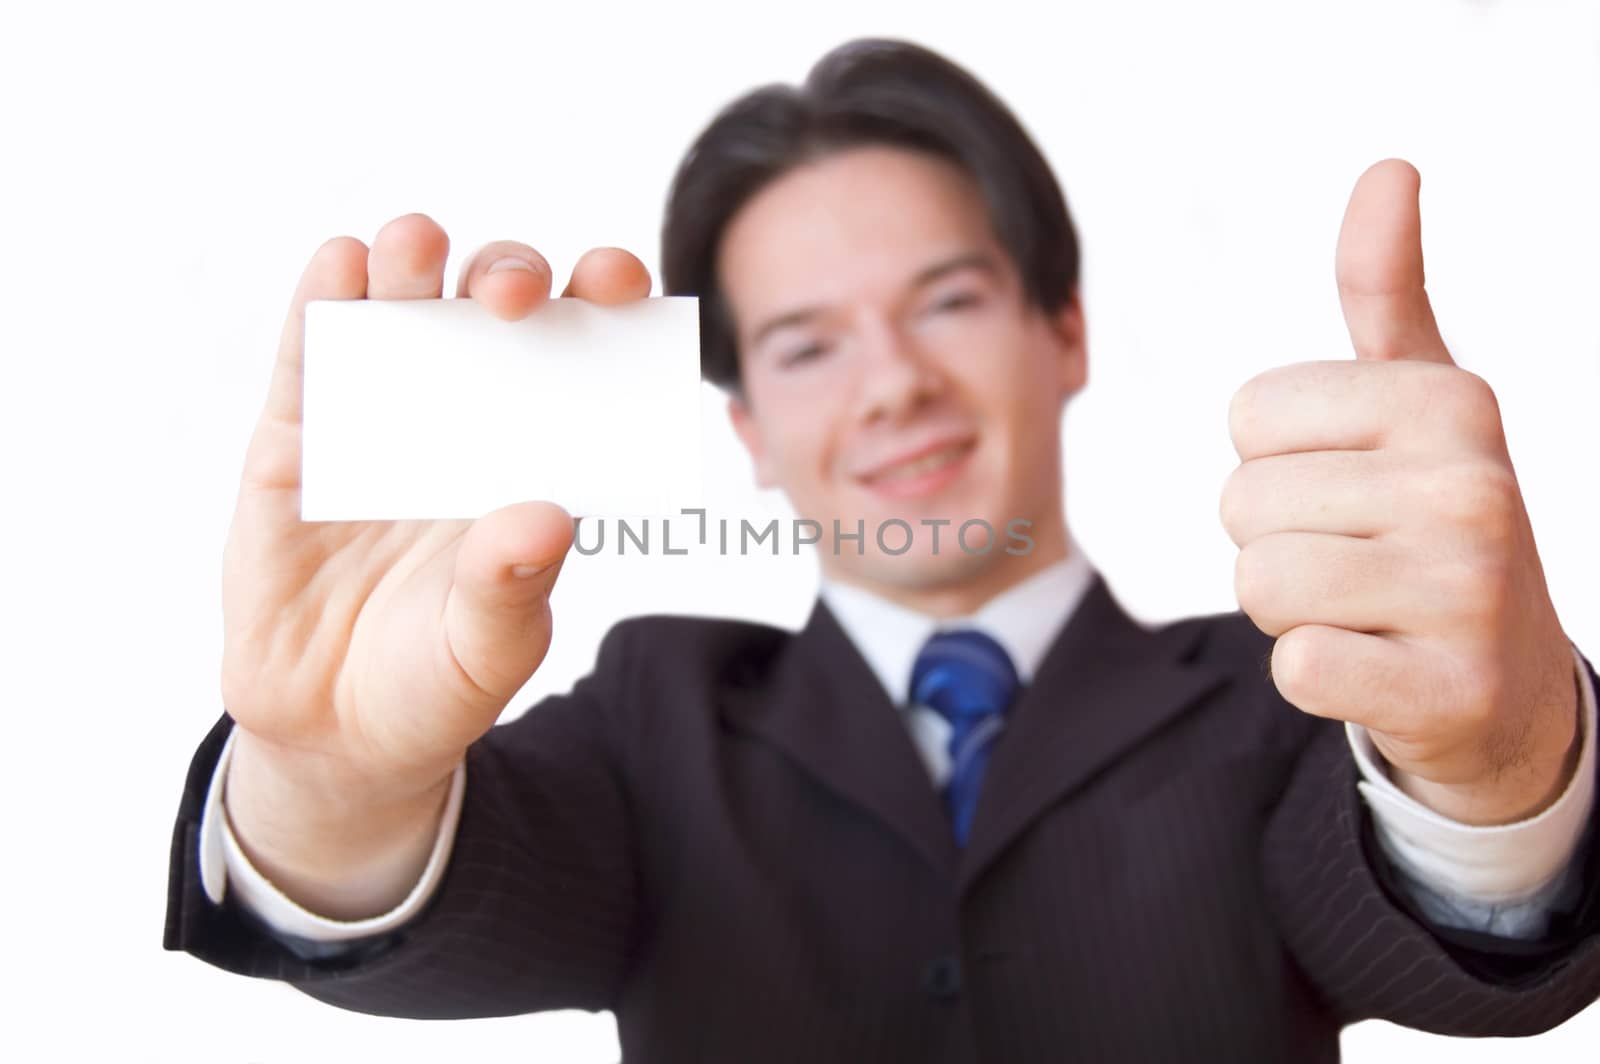 Business card conceptual image. Businessman holding a blank business card.